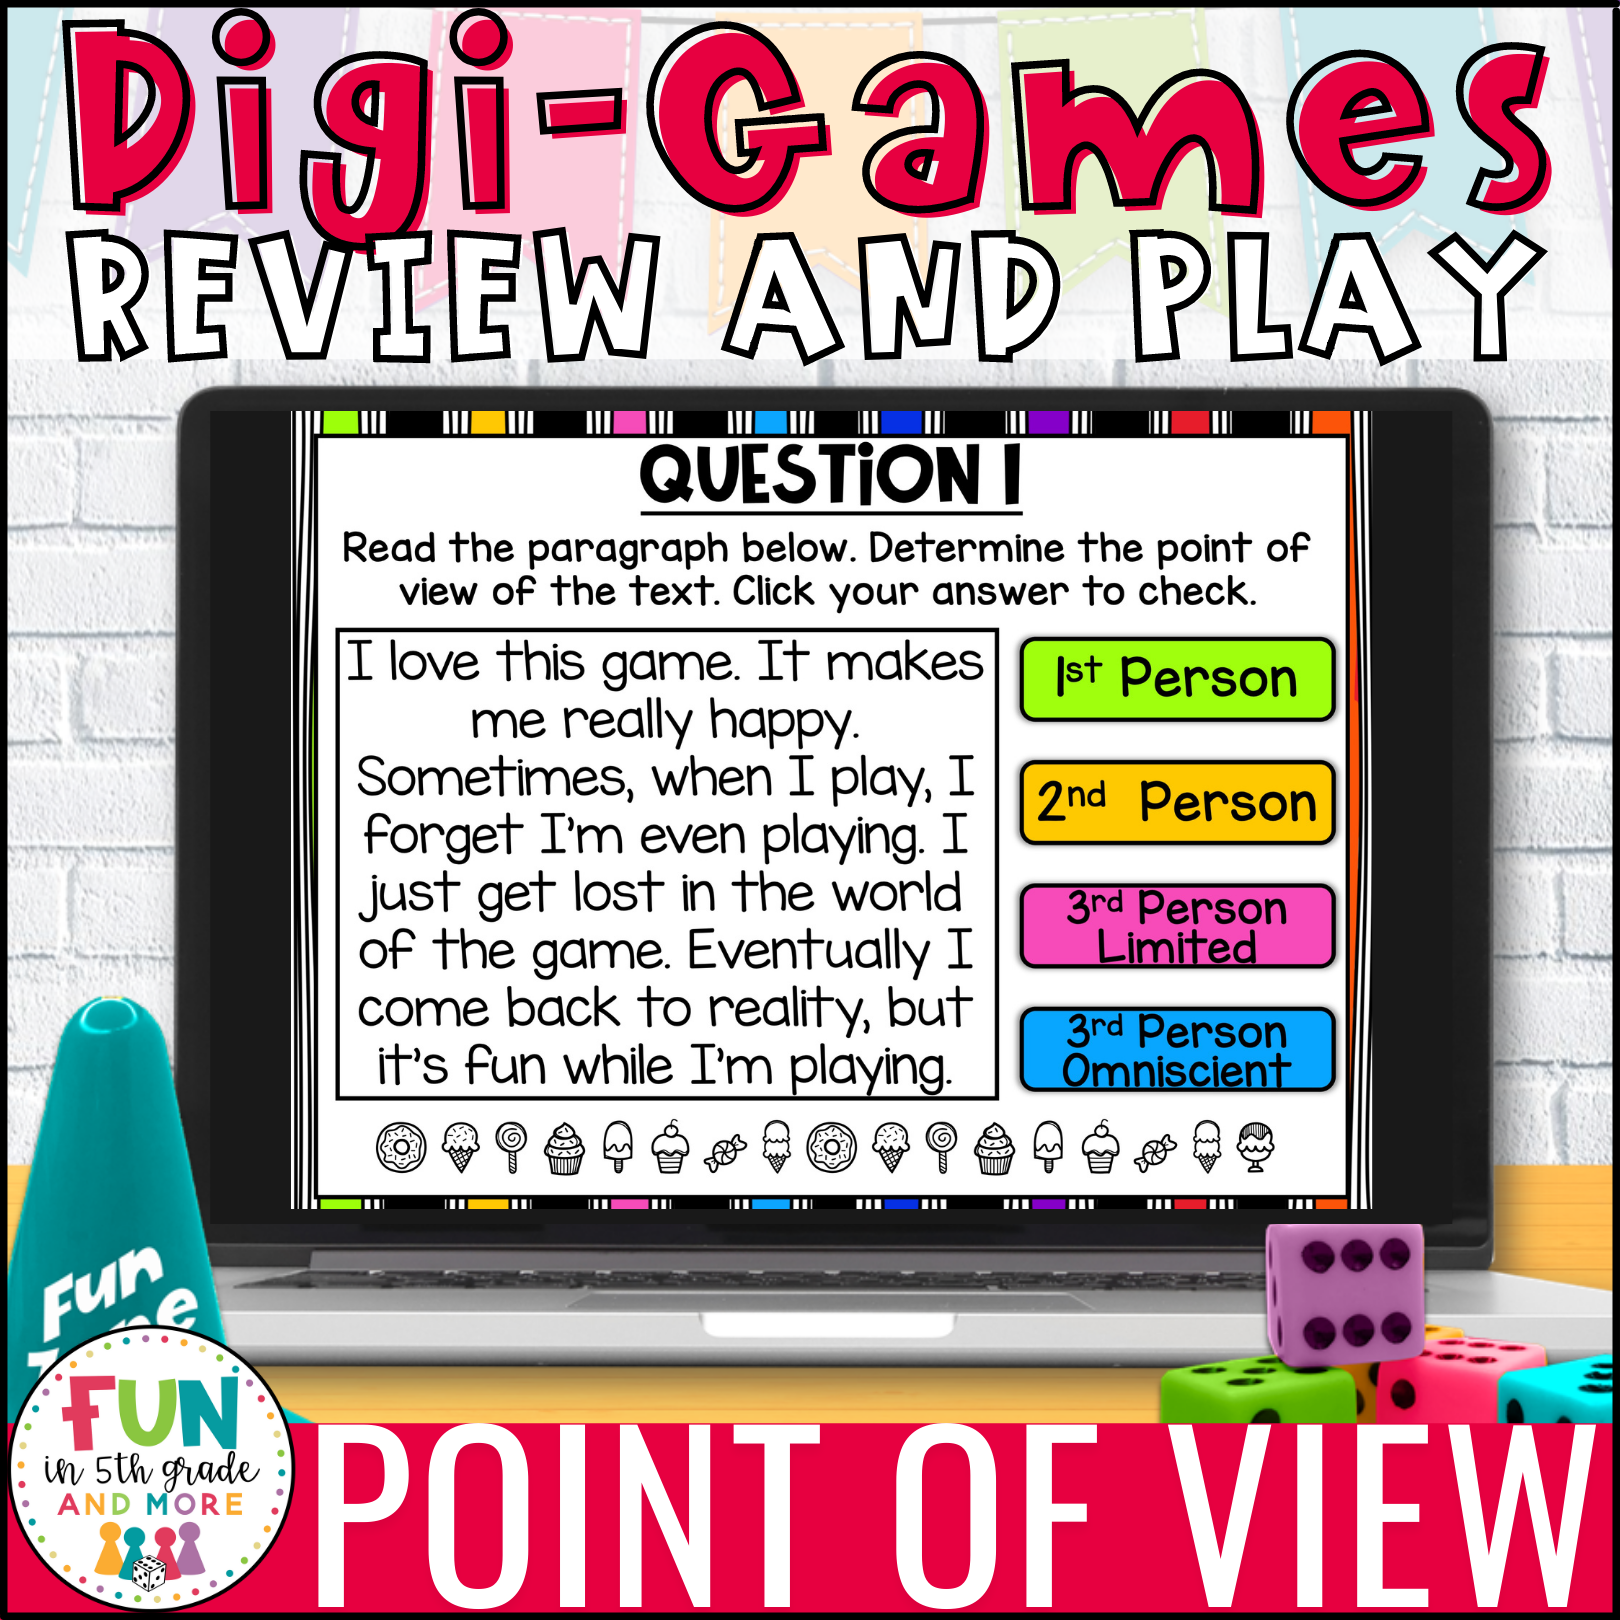 Point of View Digital Review Game